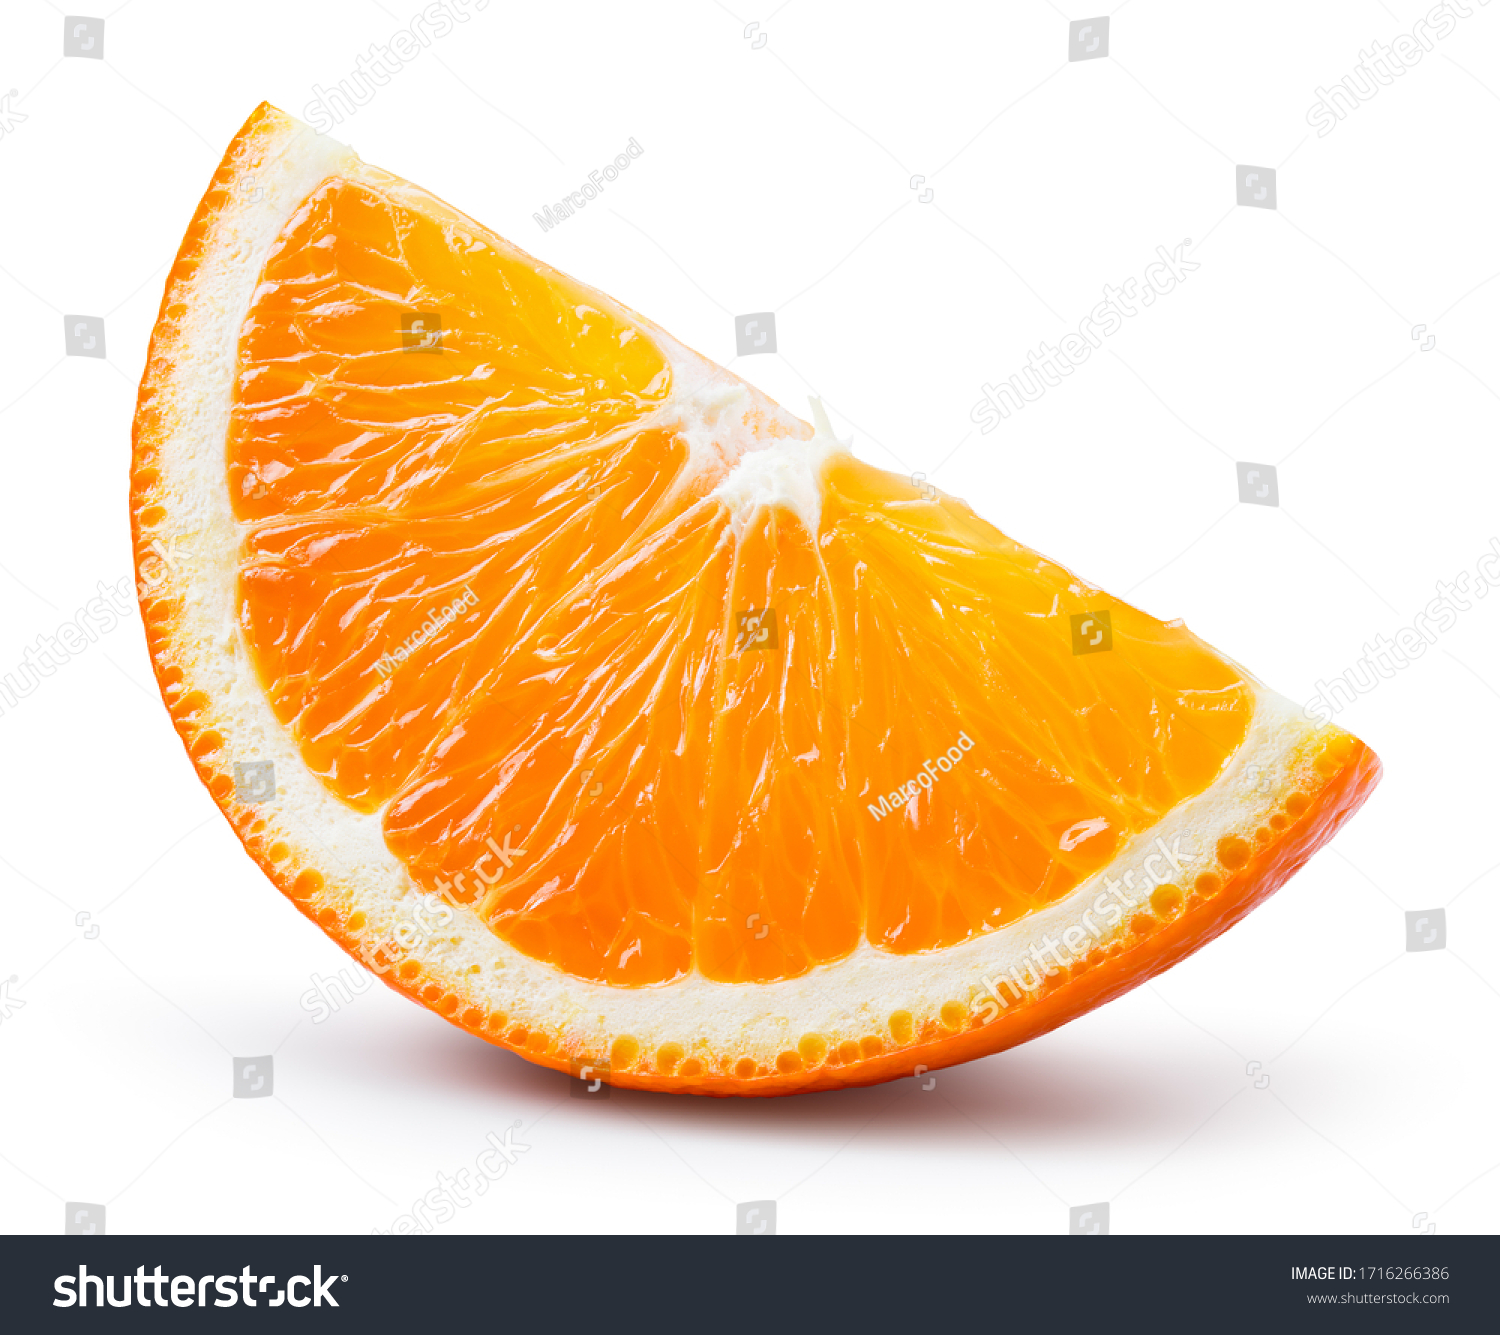 Orange slice isolated. Cut orange slice isolate. Orang slice on white with clipping path. Full depth of field. #1716266386